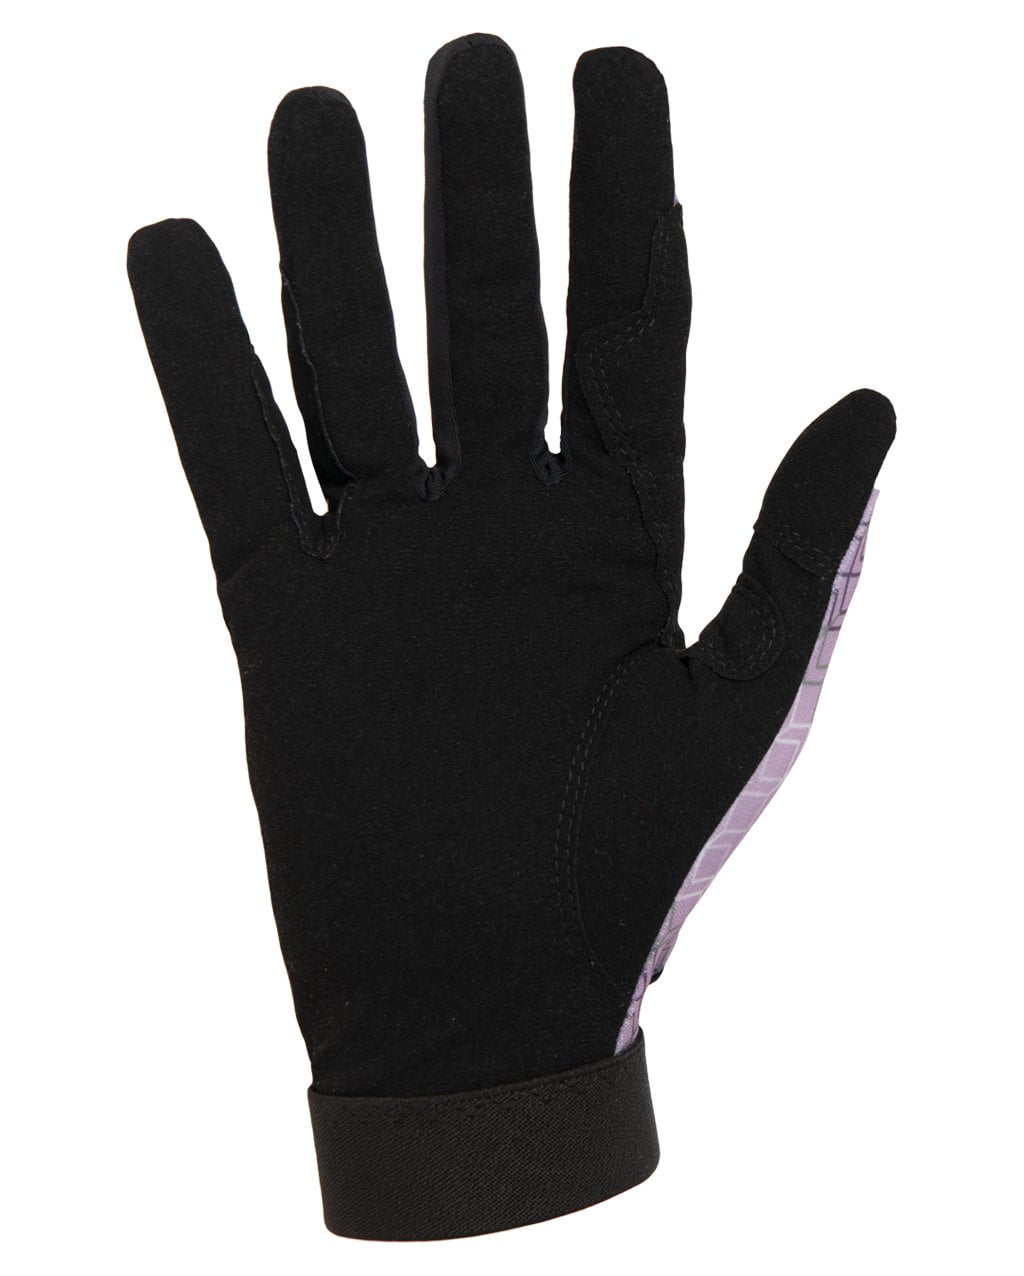 New Womens Equestrian Riding Gloves NOBLE EQUESTRIAN Perfect Fit Sz 6 Black 